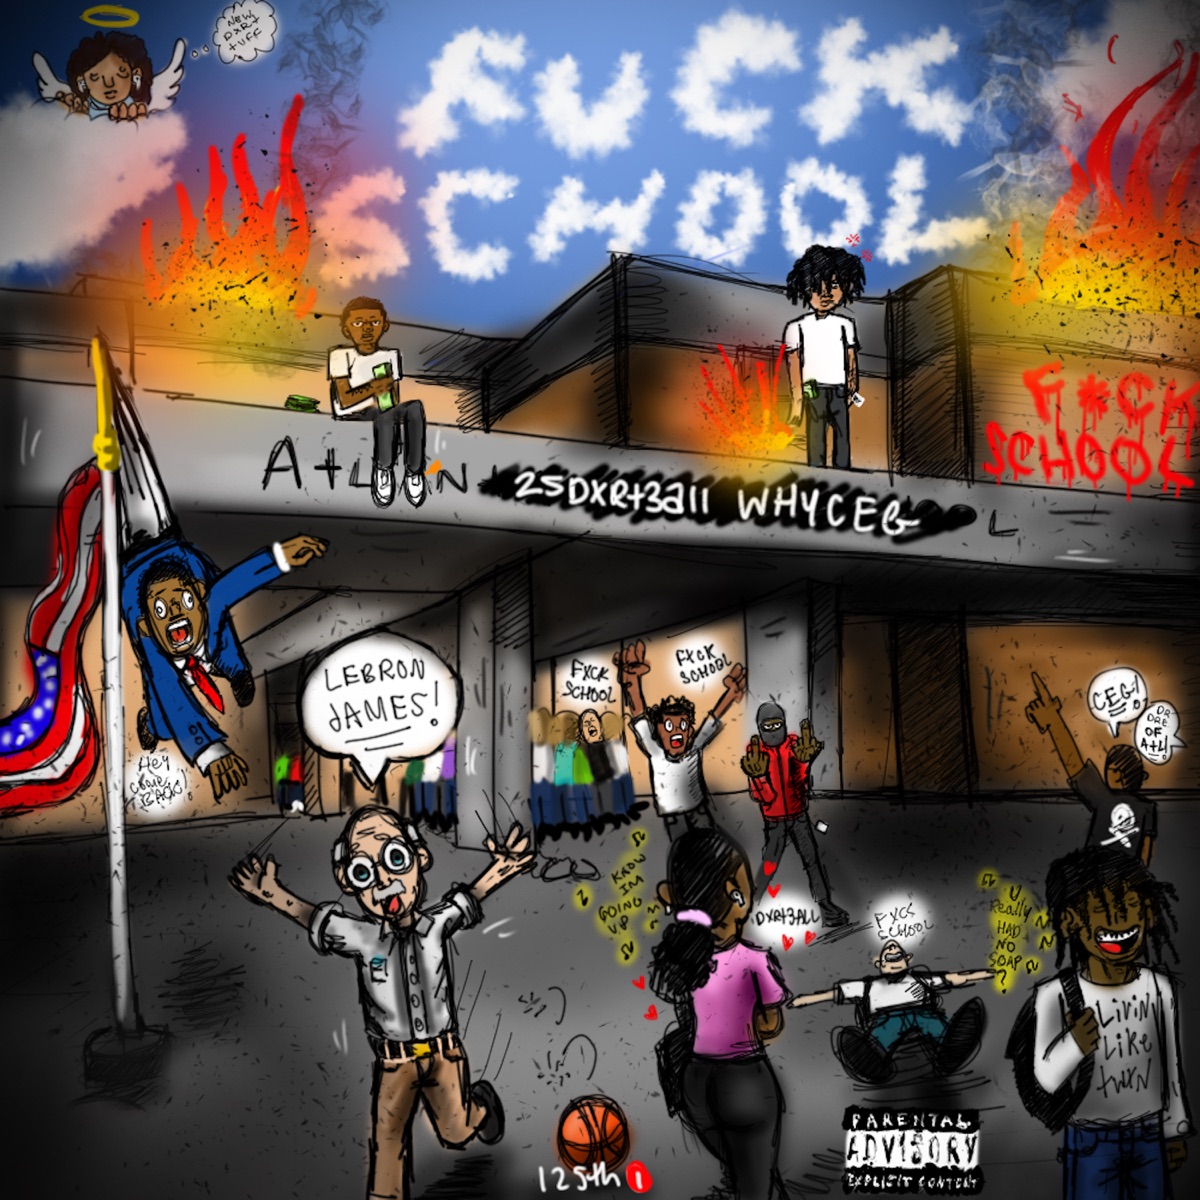 MP3: 2Sdxrt3all Ft. Roccet, Bangout & 3hard – Knocked Down